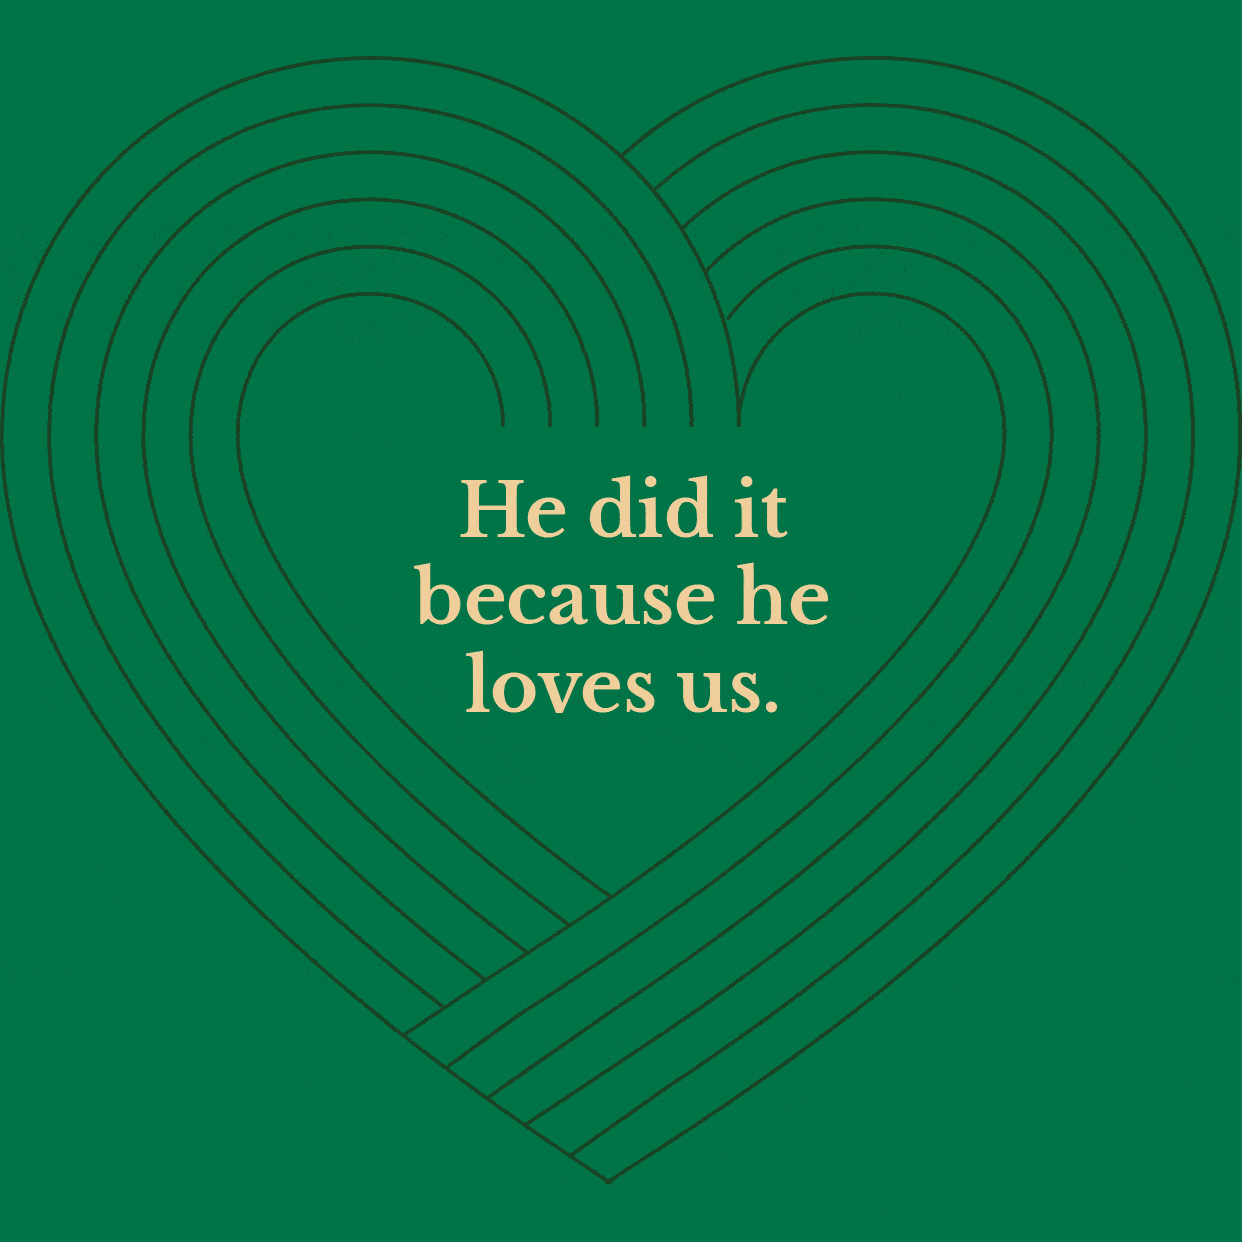 He did it because he loves us.